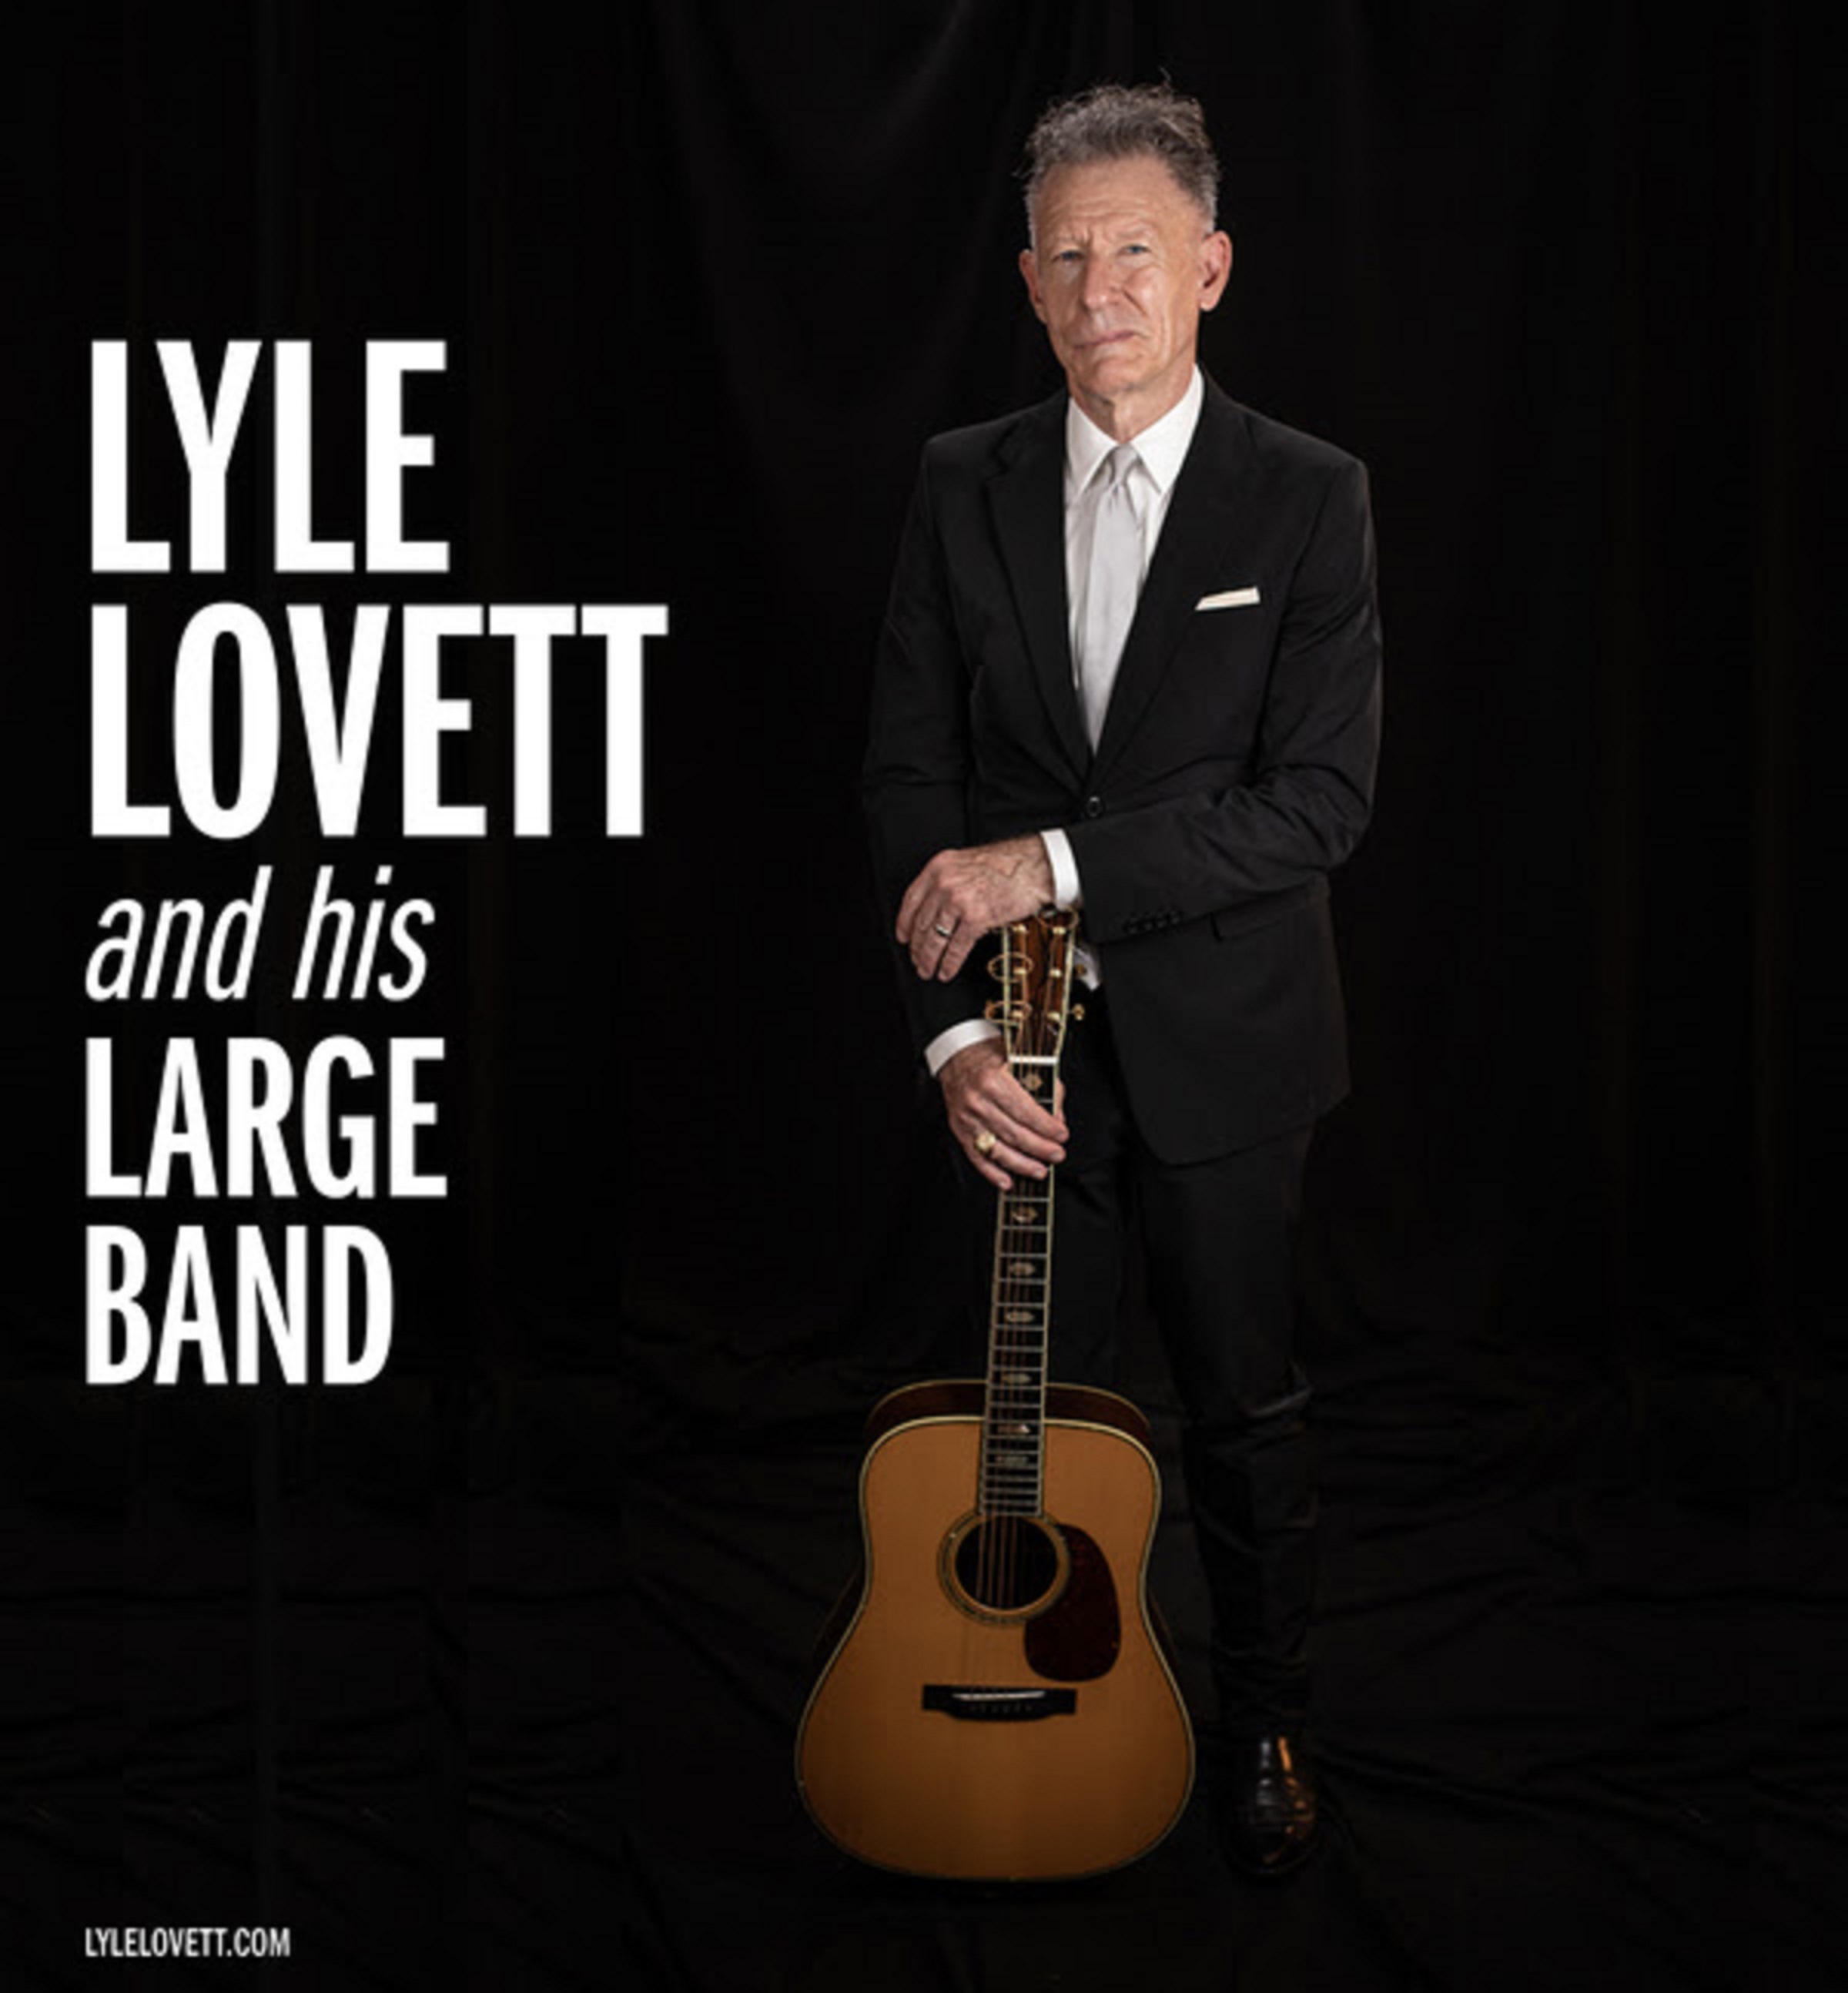 Lyle Lovett and his Large Band confirm 2022 tour + Coheadline date